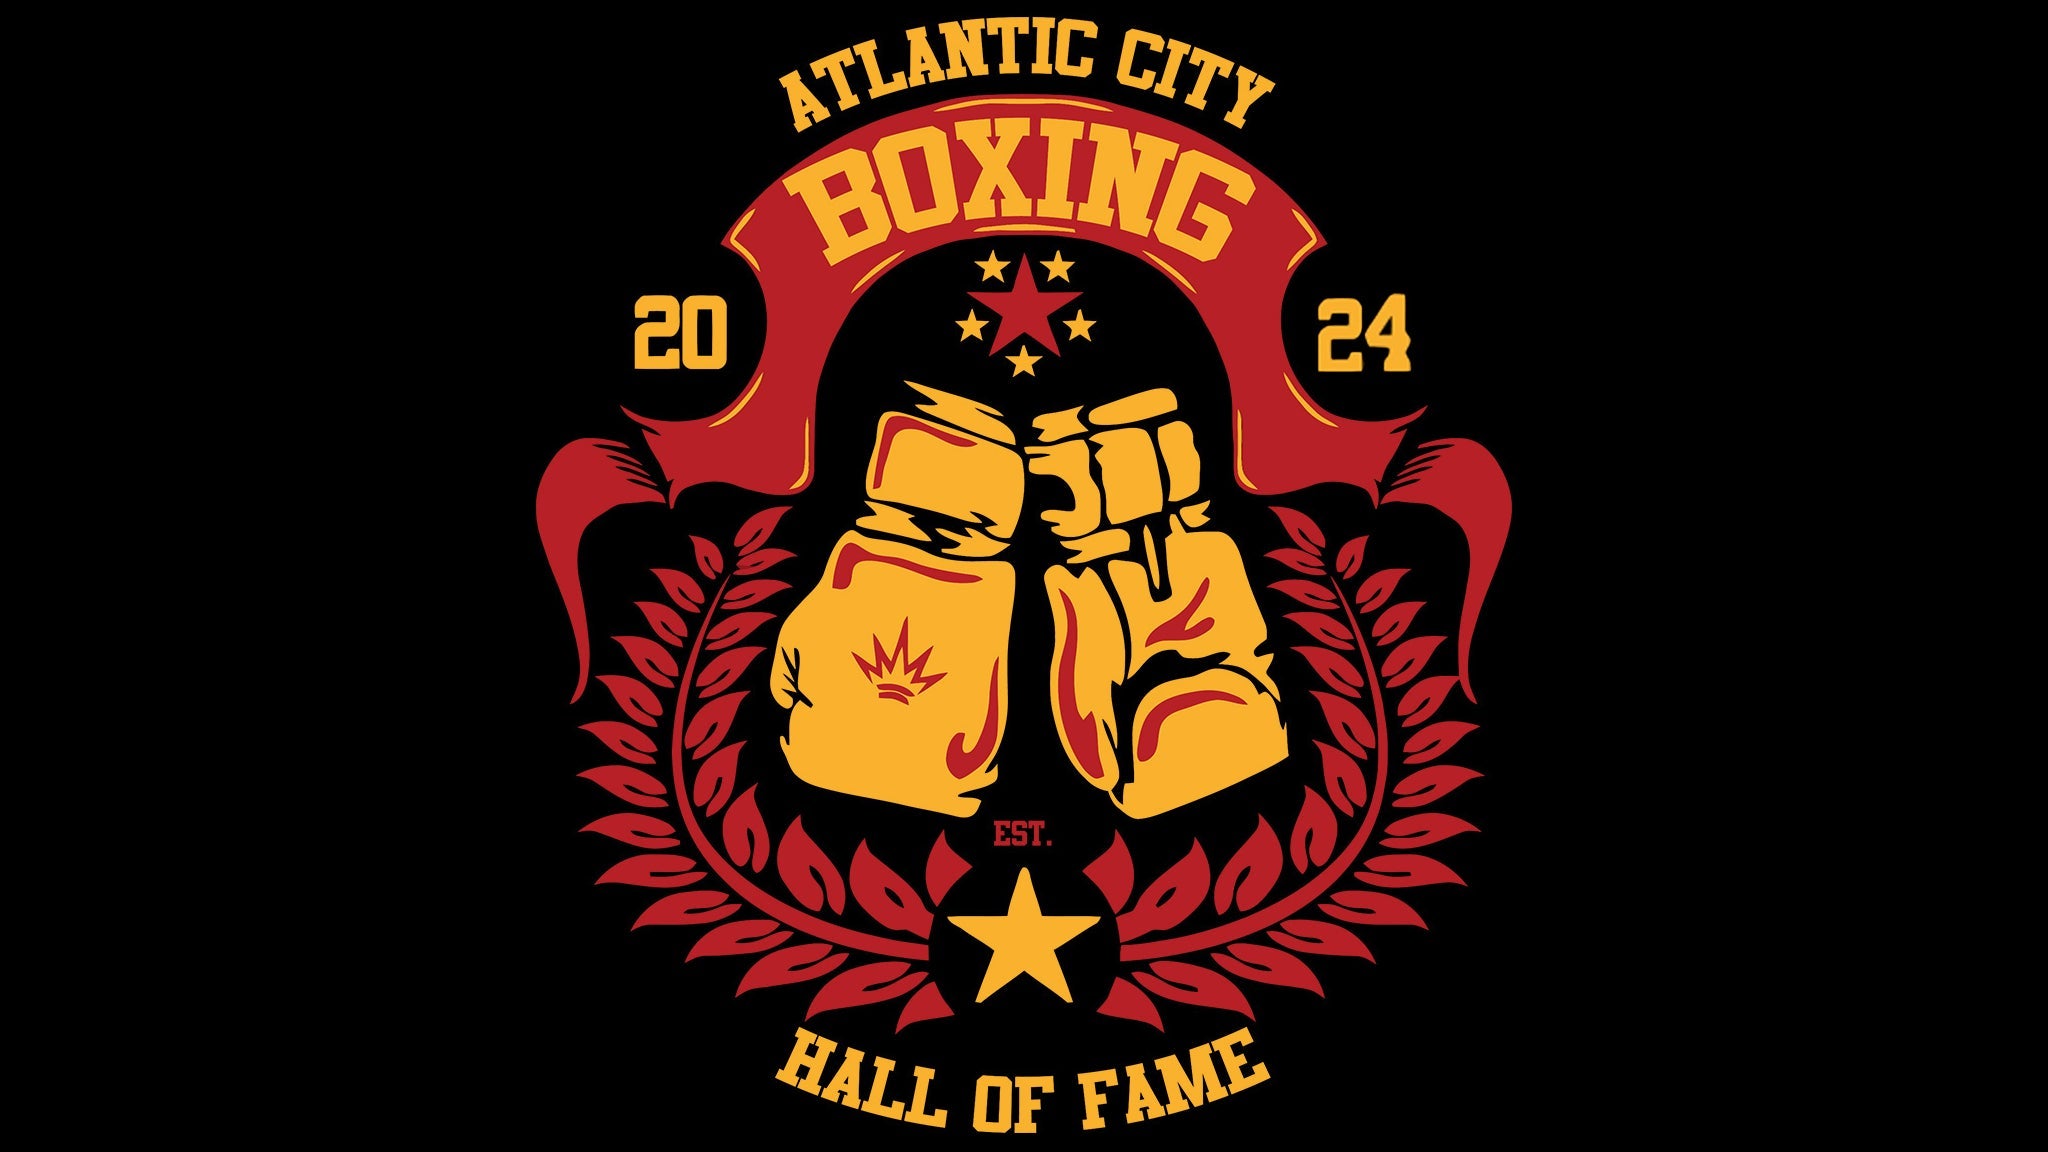 Atlantic City Boxing Hall of Fame Awards & Induction Ceremony